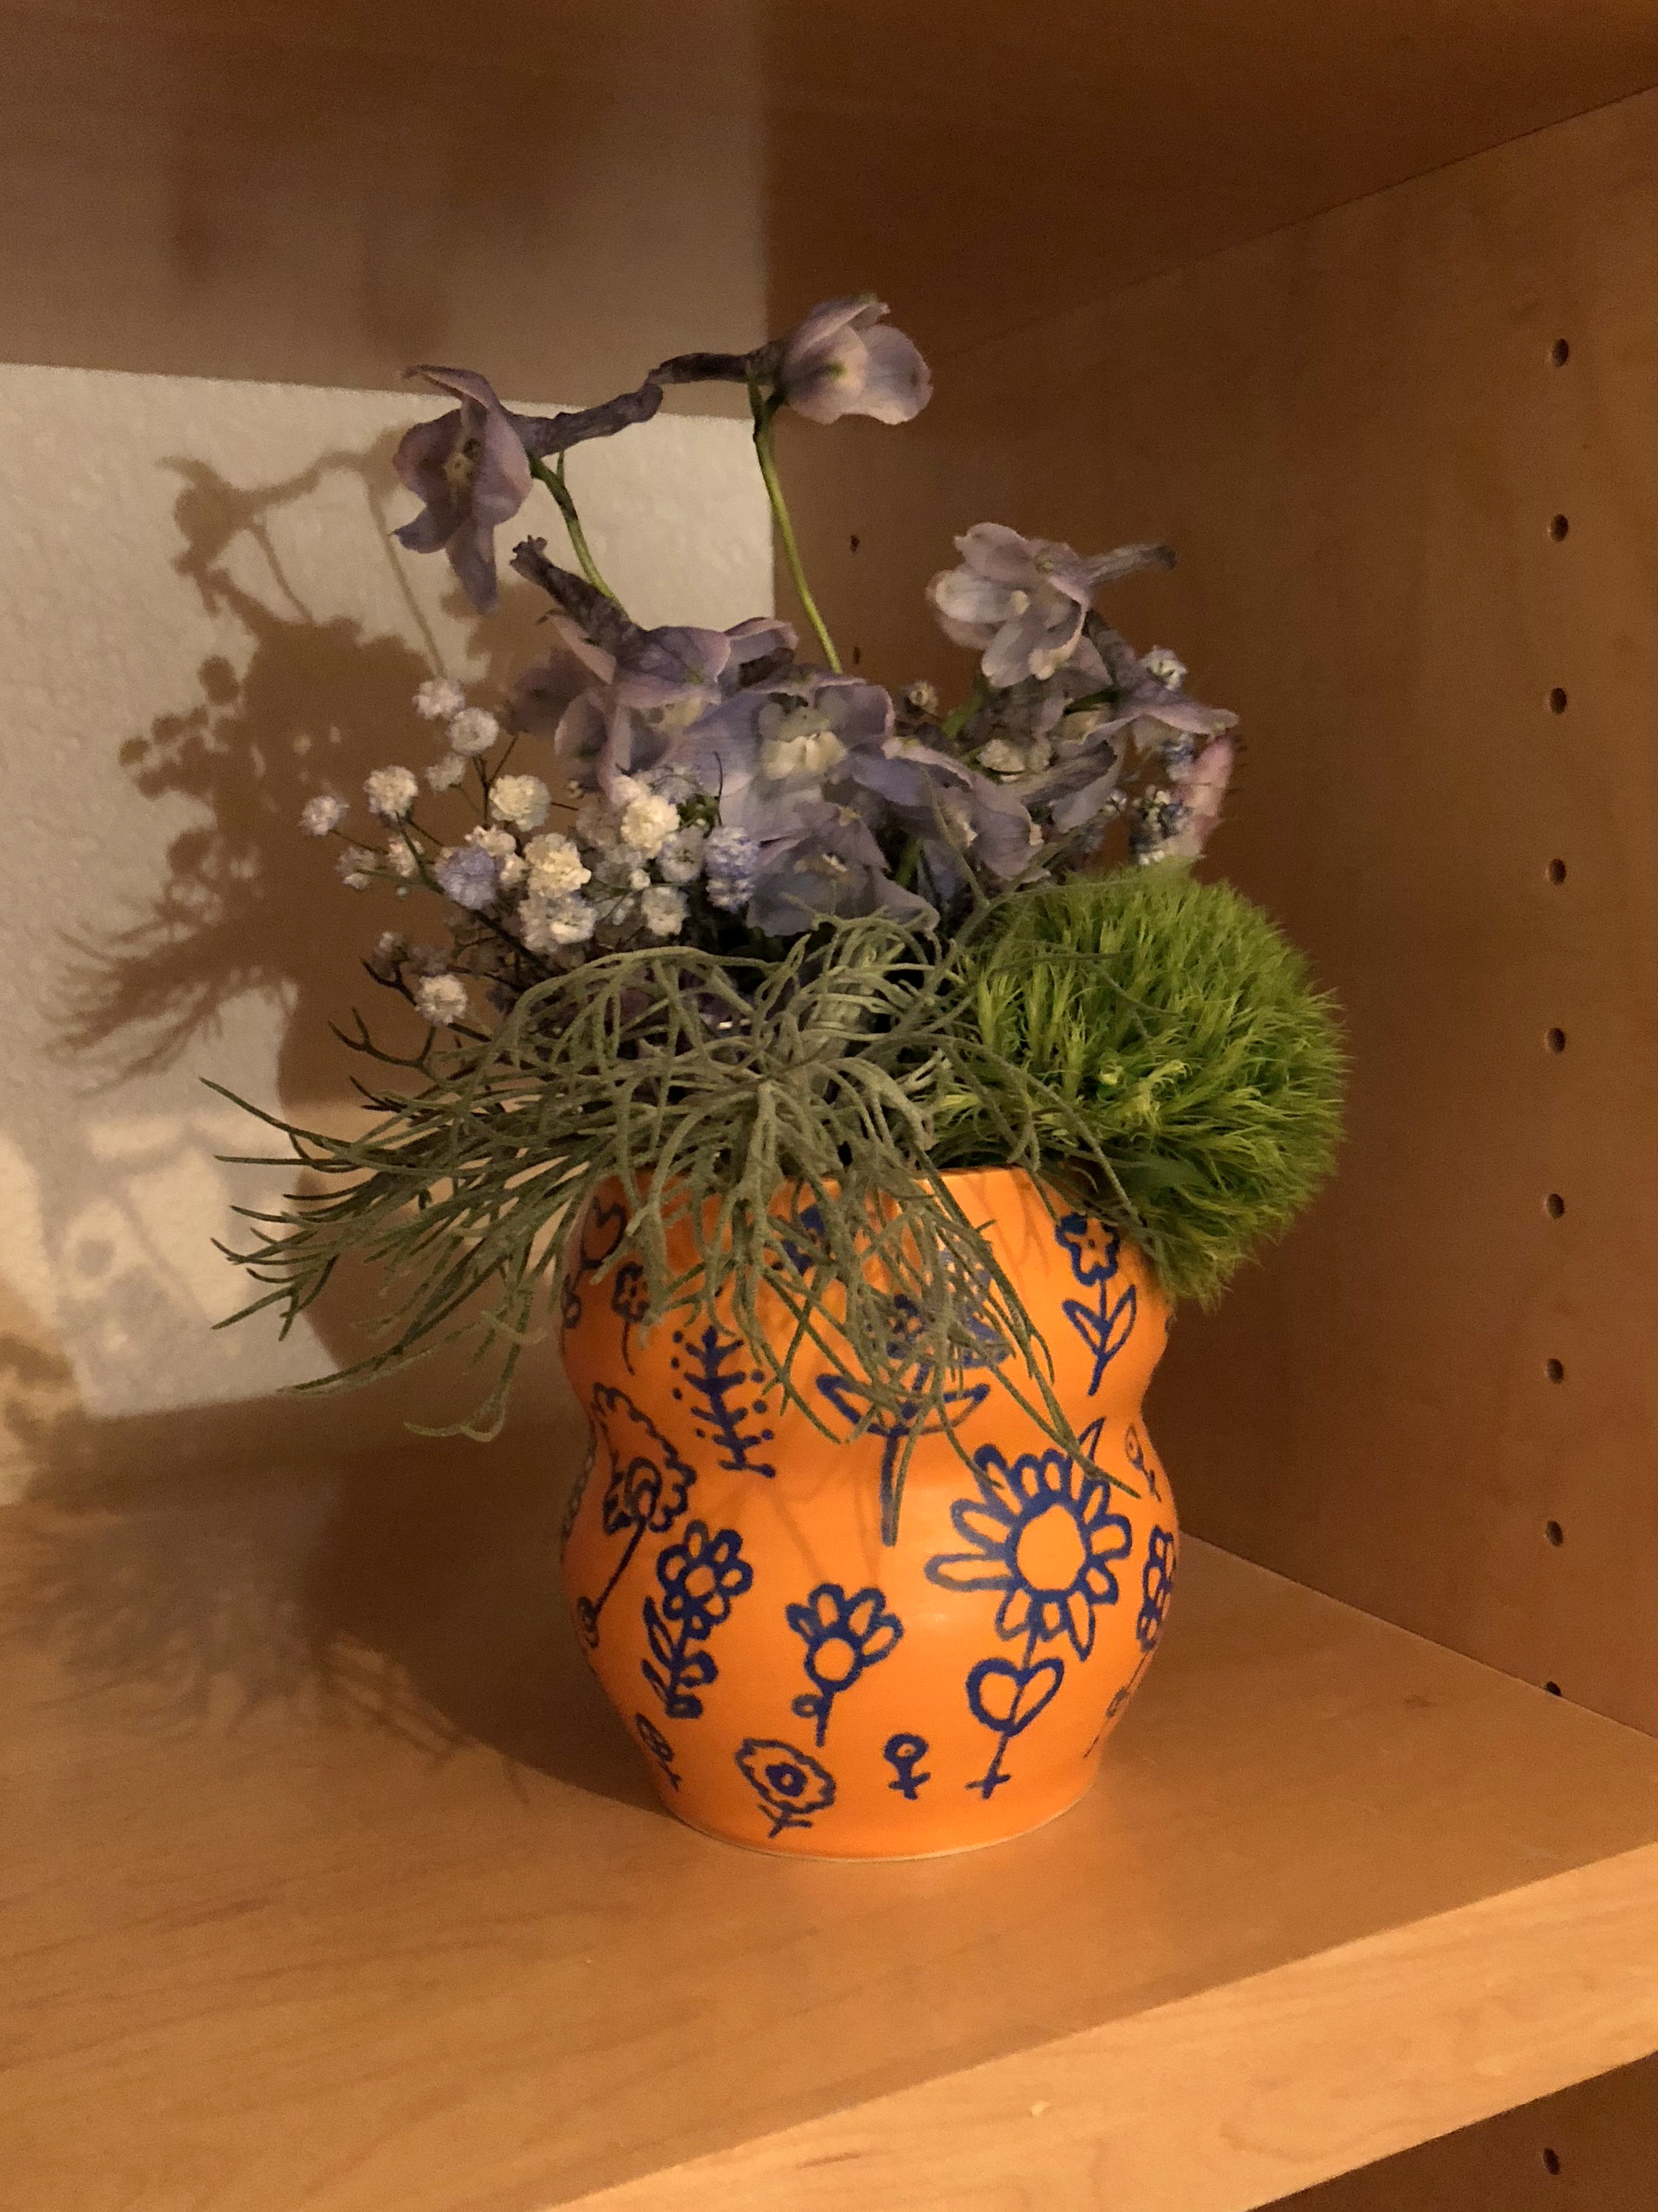 Orange ceramic vase with drawings on it holding colorful flowers